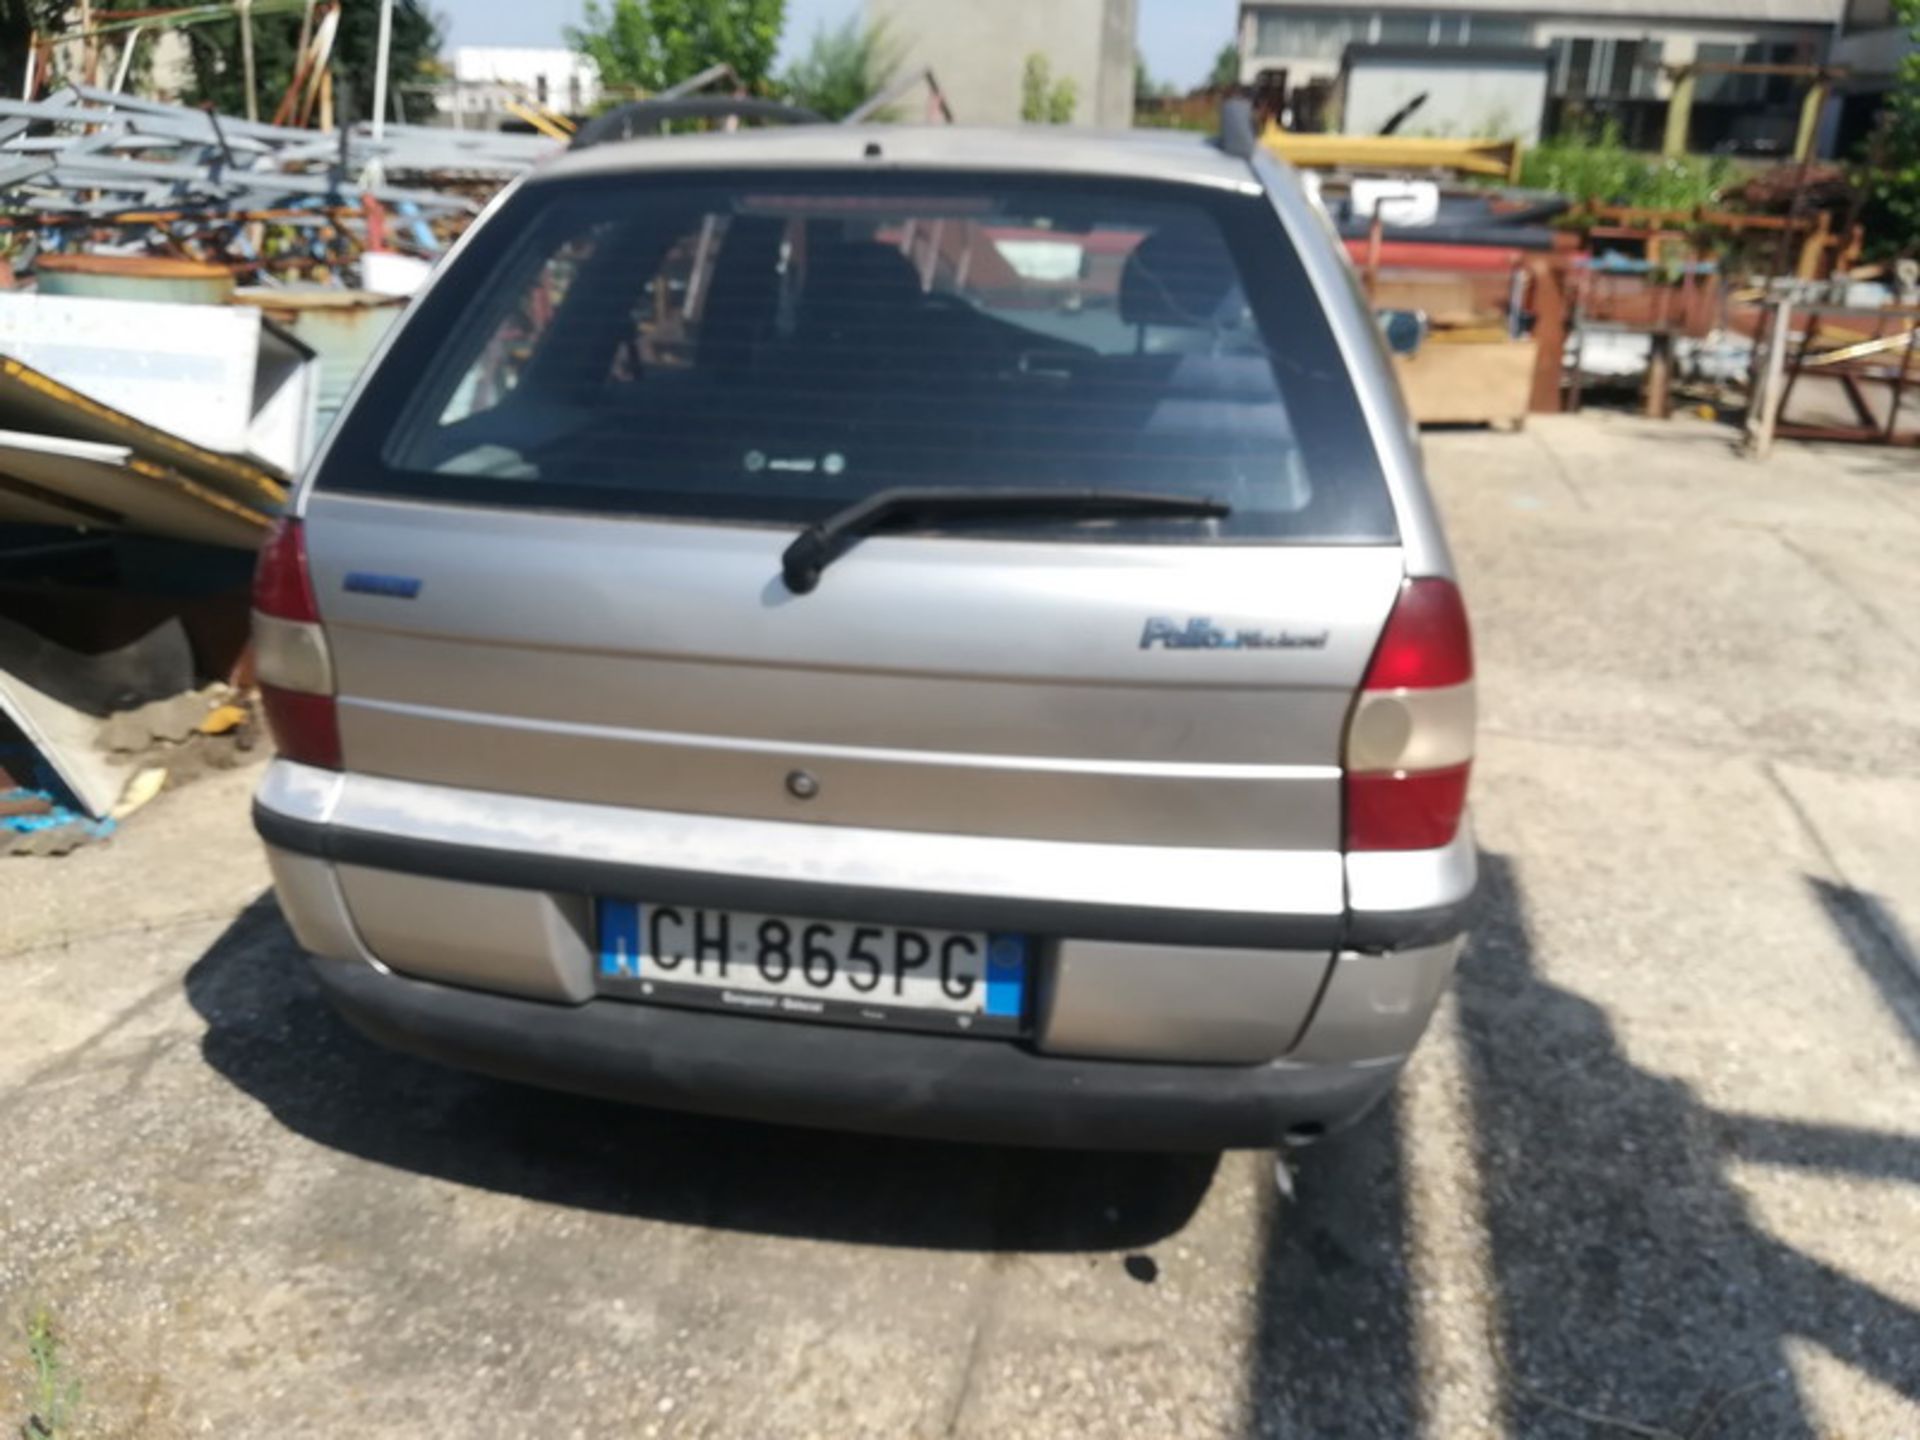 N. 4 (708 IVG FALLIMENTO) FIAT PALIO CH865PG KM CIRCA 332732 - Image 2 of 2